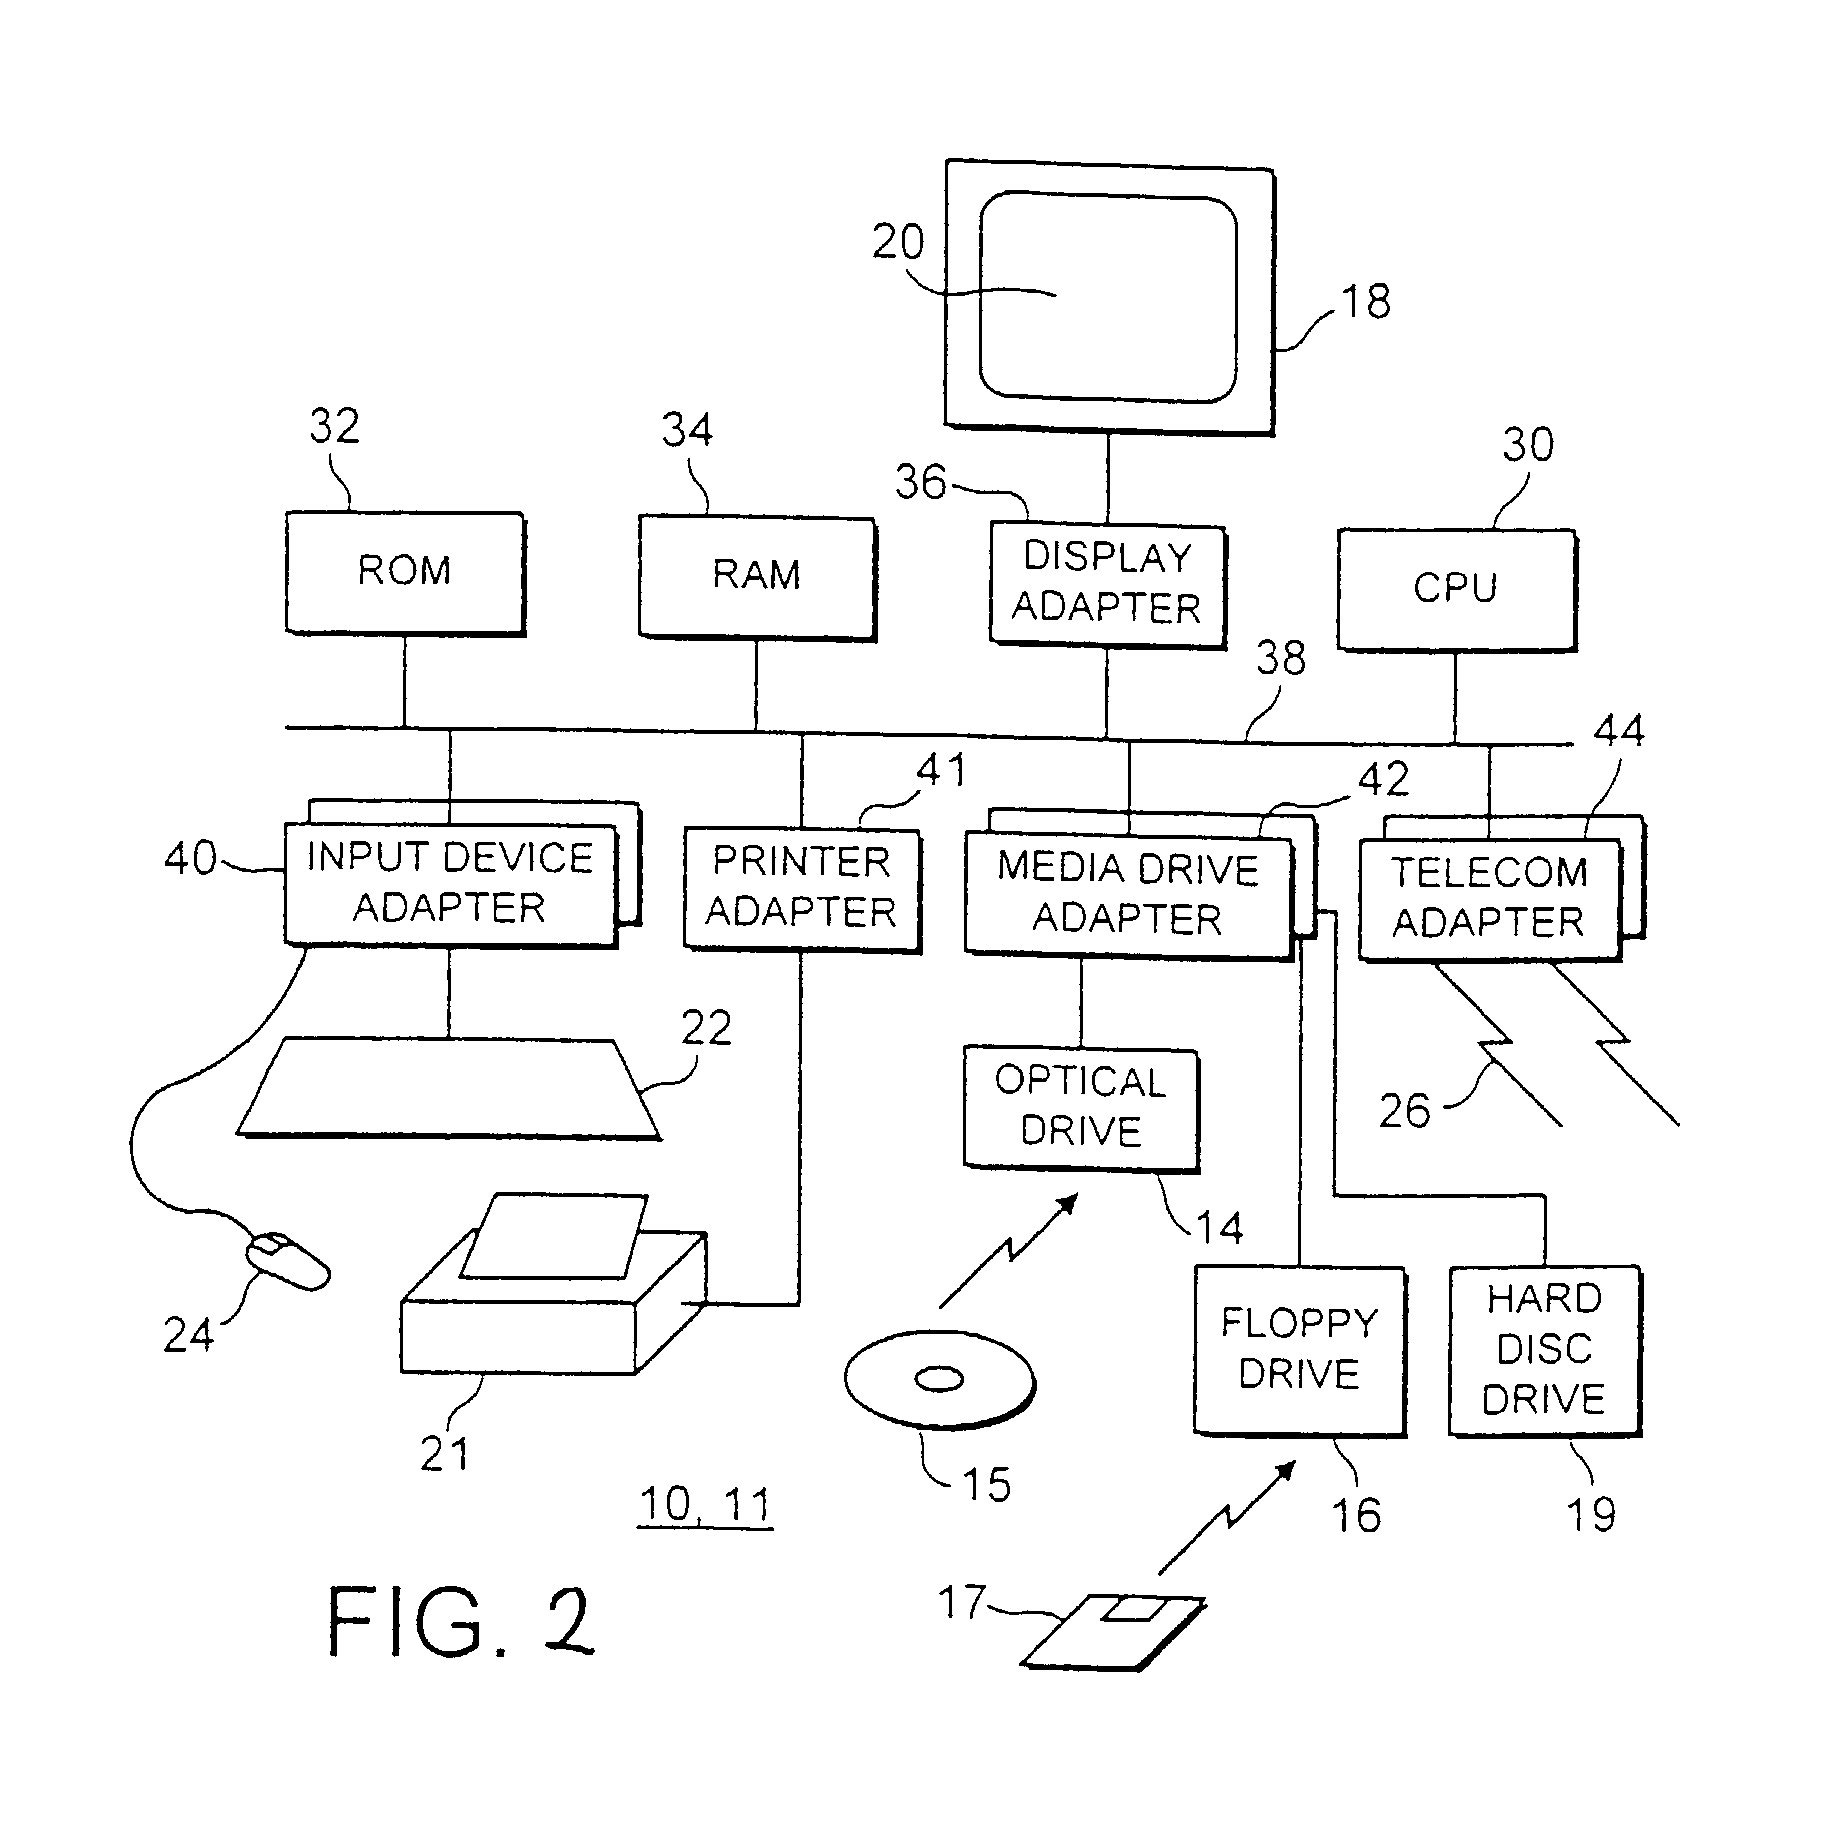 Network message generation for automated authentication